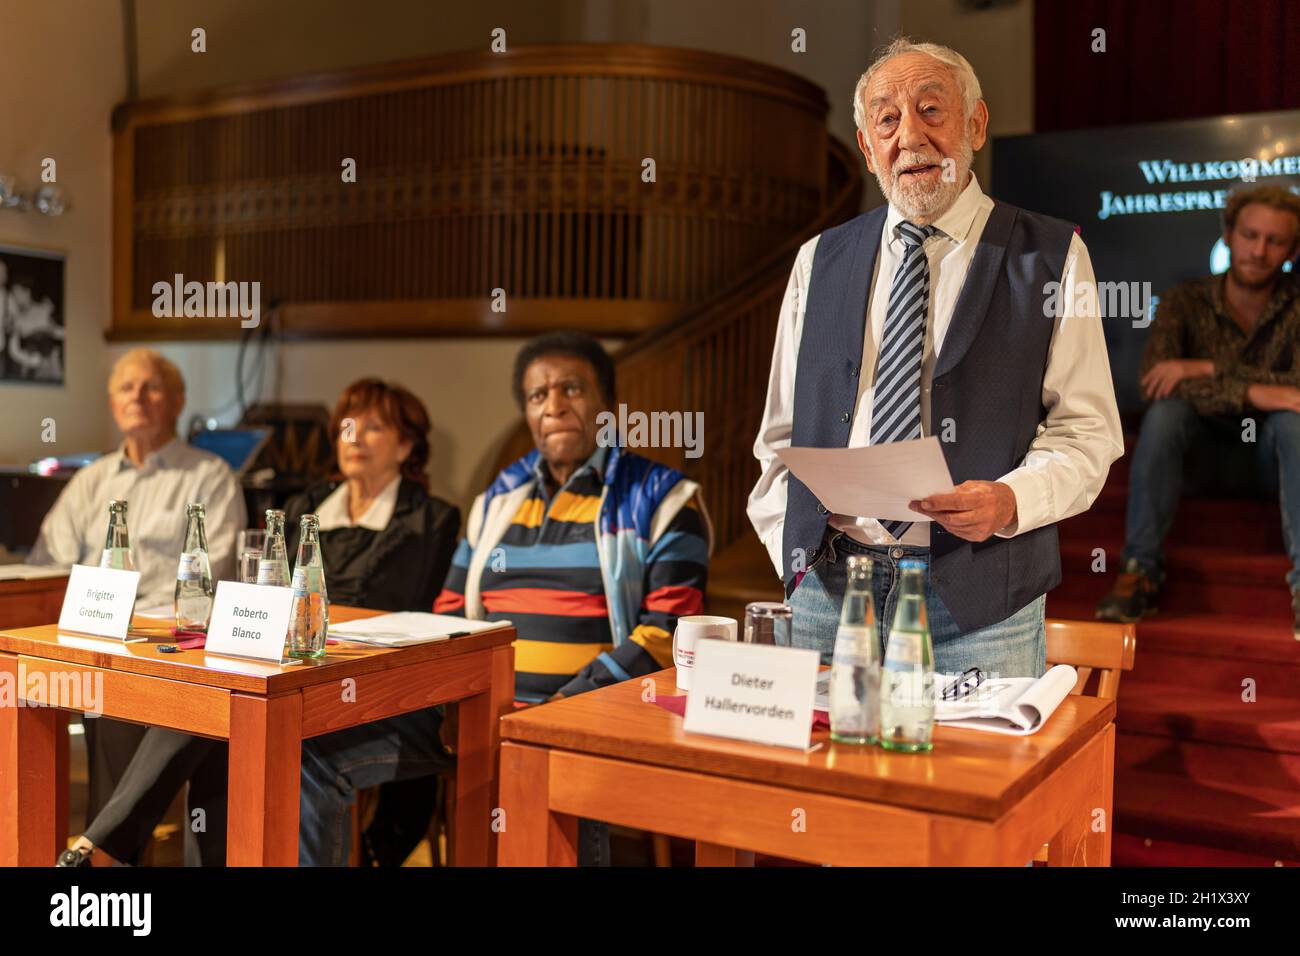 Peter Bause, Brigitte Grothum, Roberto Blanco, Dieter Hallervorden at the annual press conference at the Schlosspark Theater in Berlin. Stock Photo